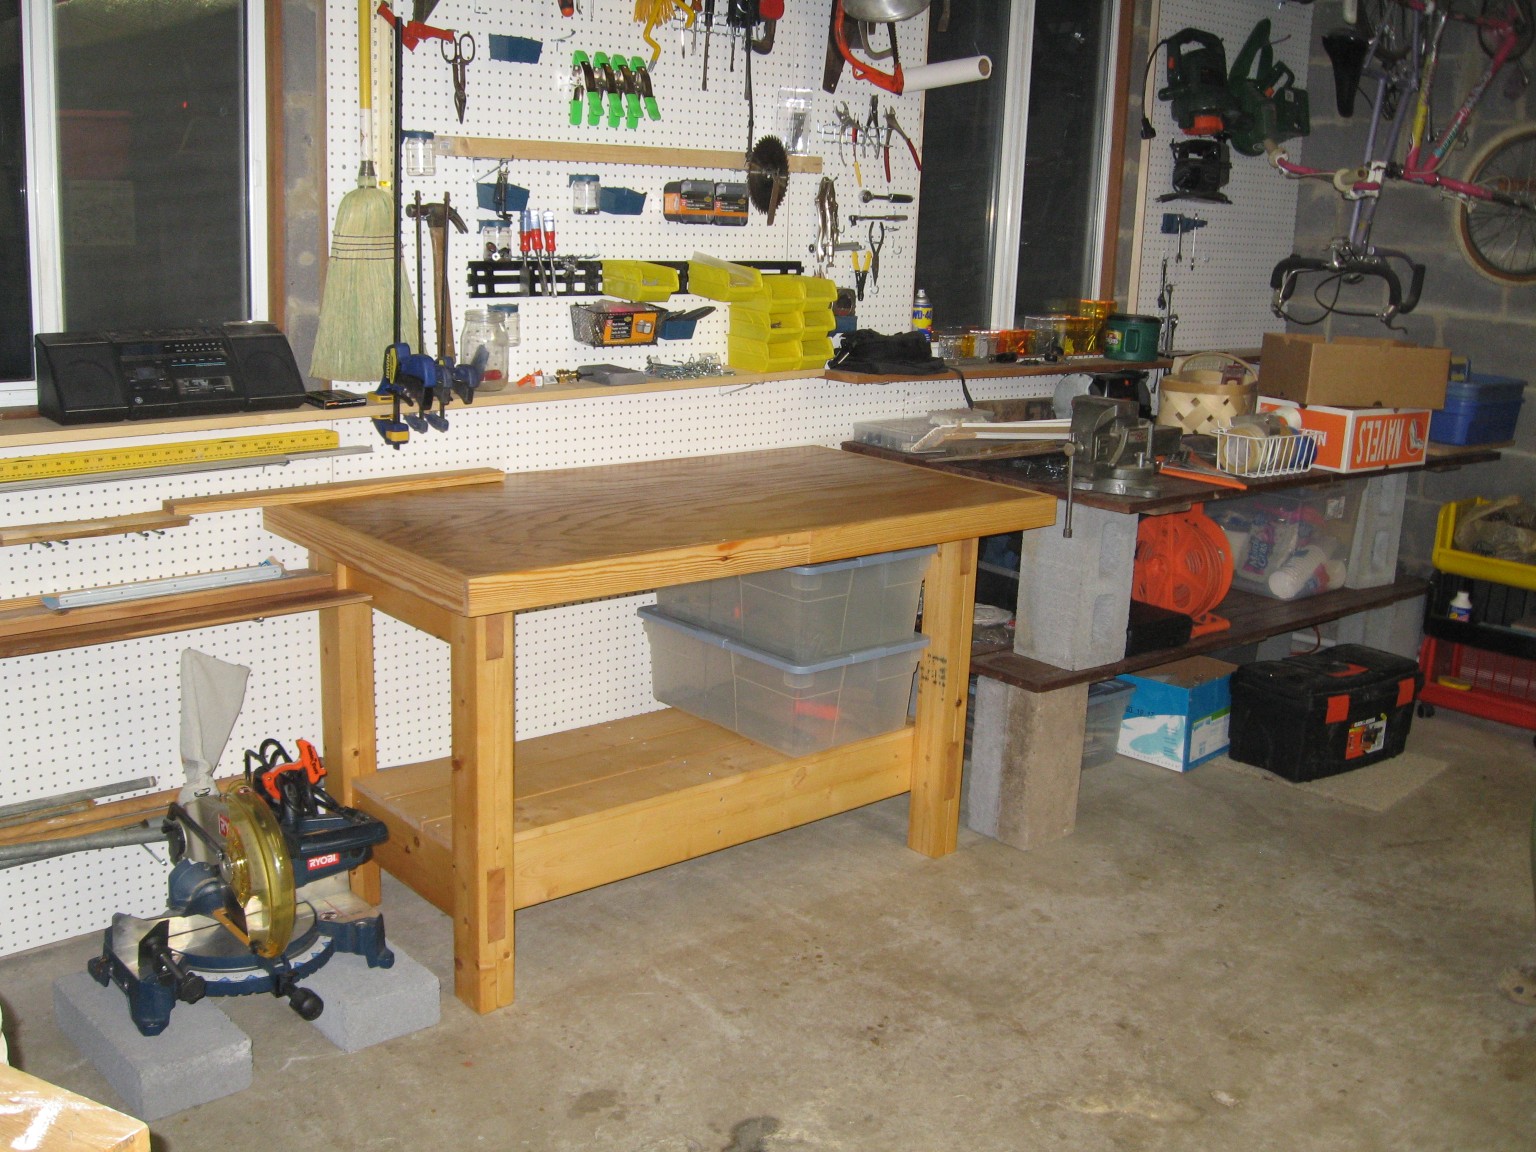 palns design: More Home made wood work bench